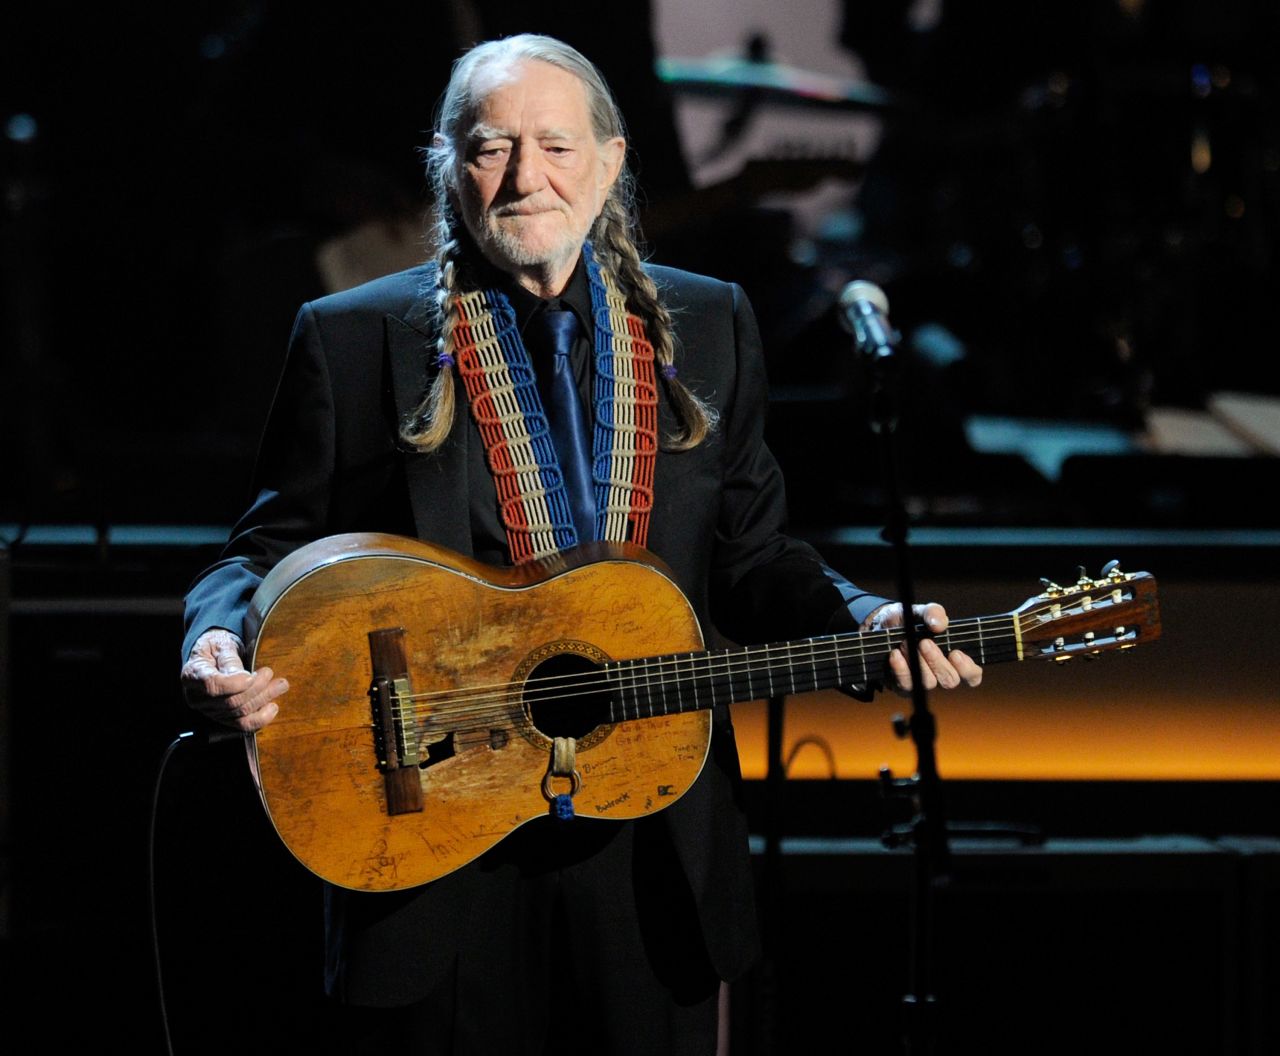 After the airing of the documentary and the <a href="http://www.change.org/petitions/willie-nelson-respect-animals-don-t-perform-at-seaworld" target="_blank" target="_blank">Change.org petition</a> urging Willie Nelson to withdraw from the concert series, Nelson obliged, saying, "<a href="http://www.cnn.com/2013/12/06/showbiz/seaworld-willie-nelson-blackfish/index.html">What they do at SeaWorld is not OK.</a>" He told CNN's Brooke Baldwin: "I don't agree with the way they treat their animals. (Canceling the show) wasn't that hard a deal for me."